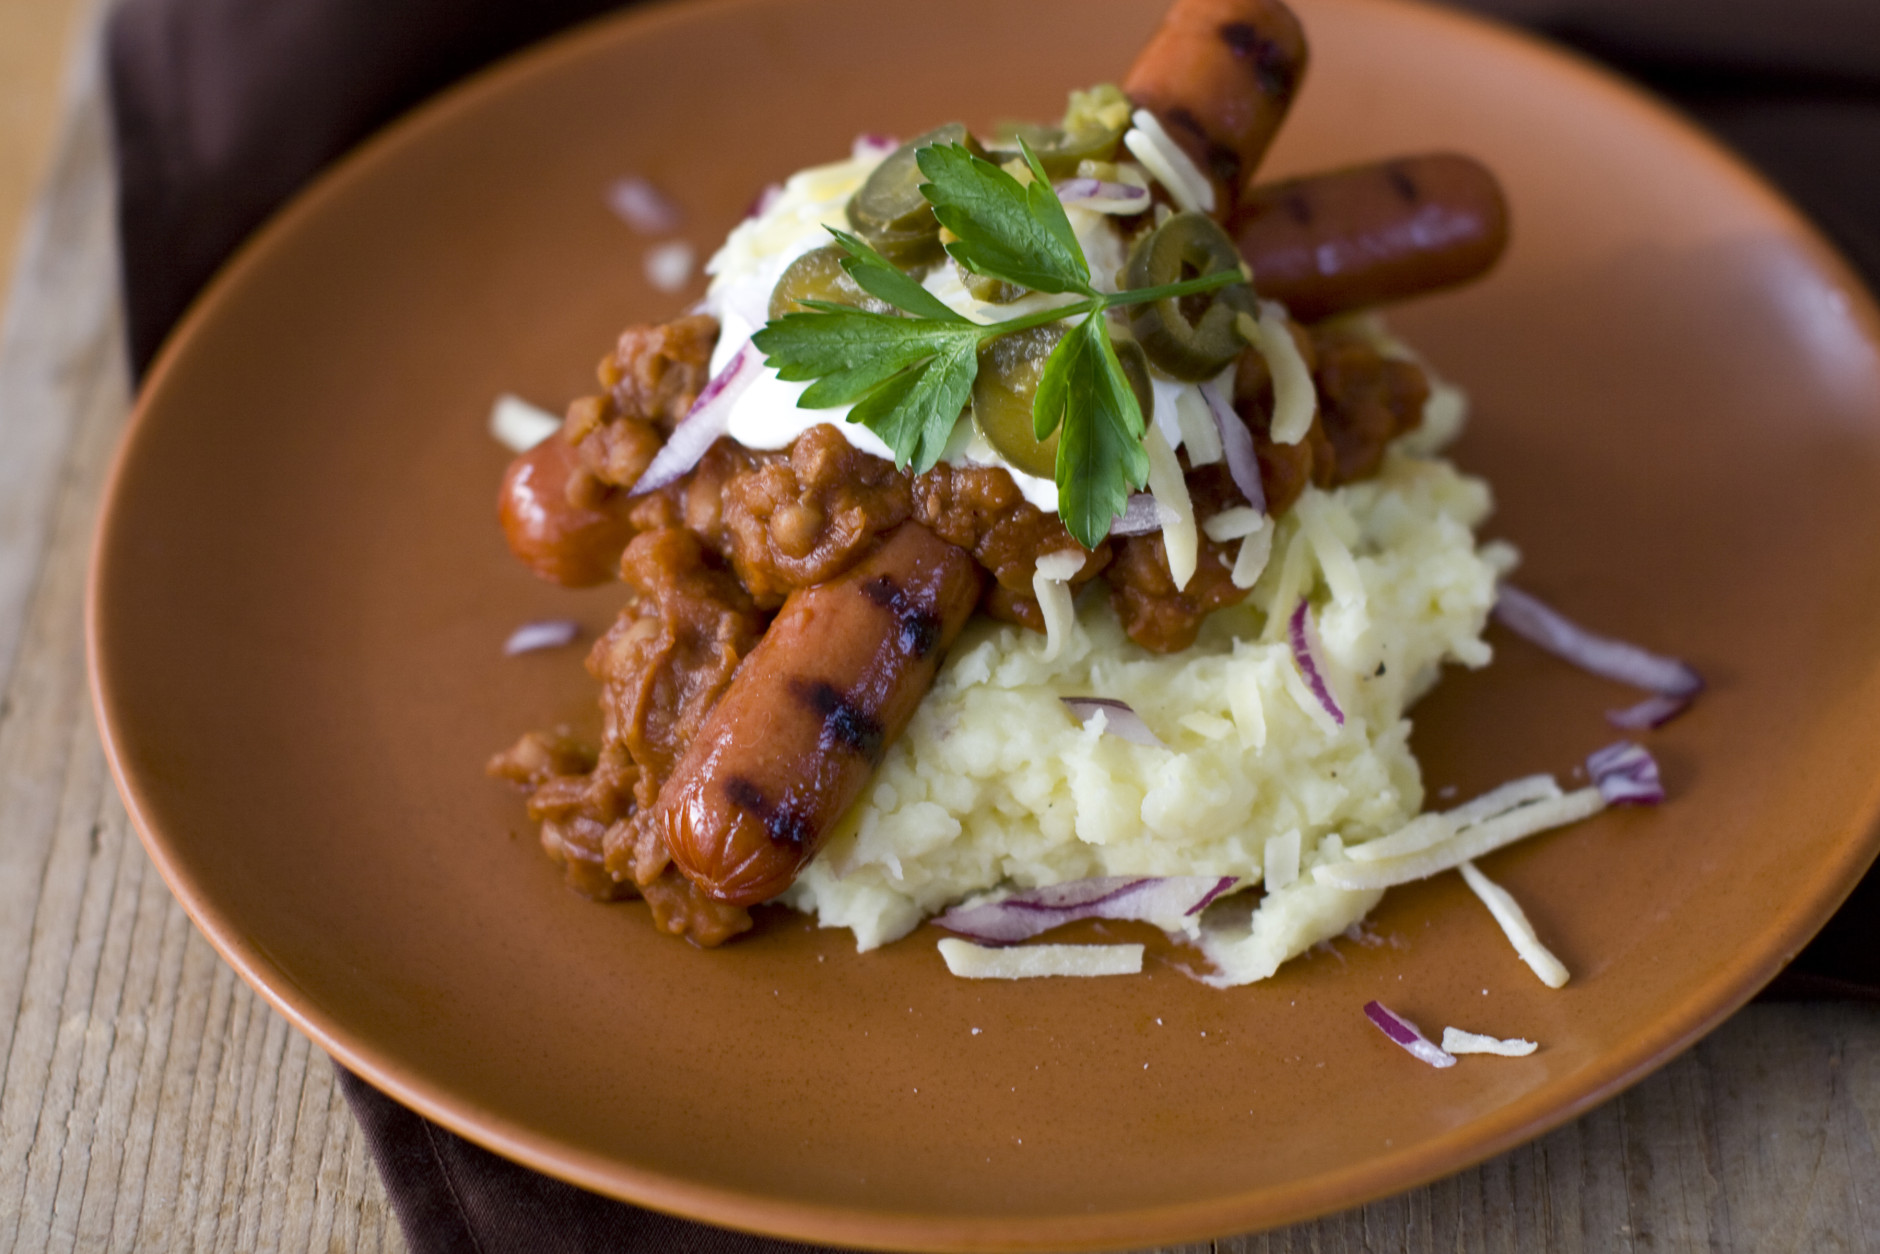 This Oct. 31, 2011 photo shows winter chili dogs in Concord, N.H.  To serve, divide the mashed potatoes between 4 serving plates. Top each with a hot dog, then ladle the beans over them. Top with cheese, sour cream, jalapenos and red onion.    (AP Photo/Matthew Mead)